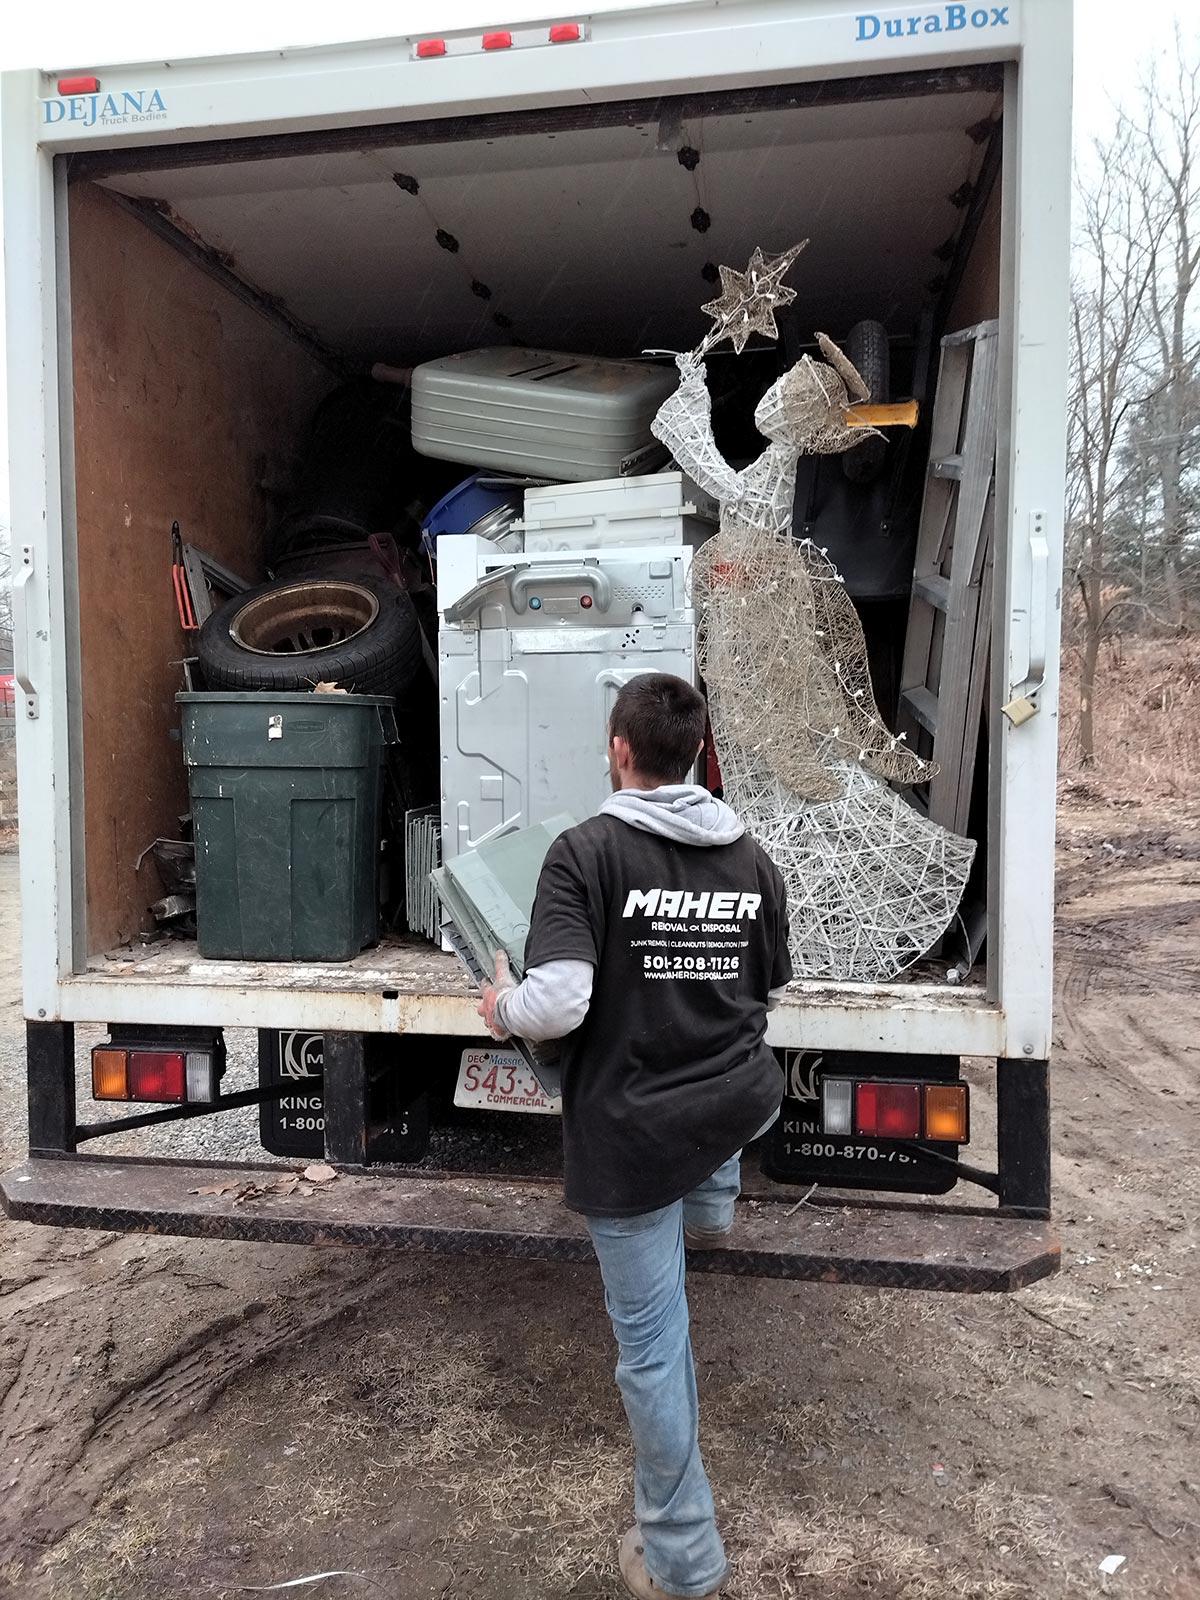 Maher Removal & Disposal is a junk removal company that can help local businesses.